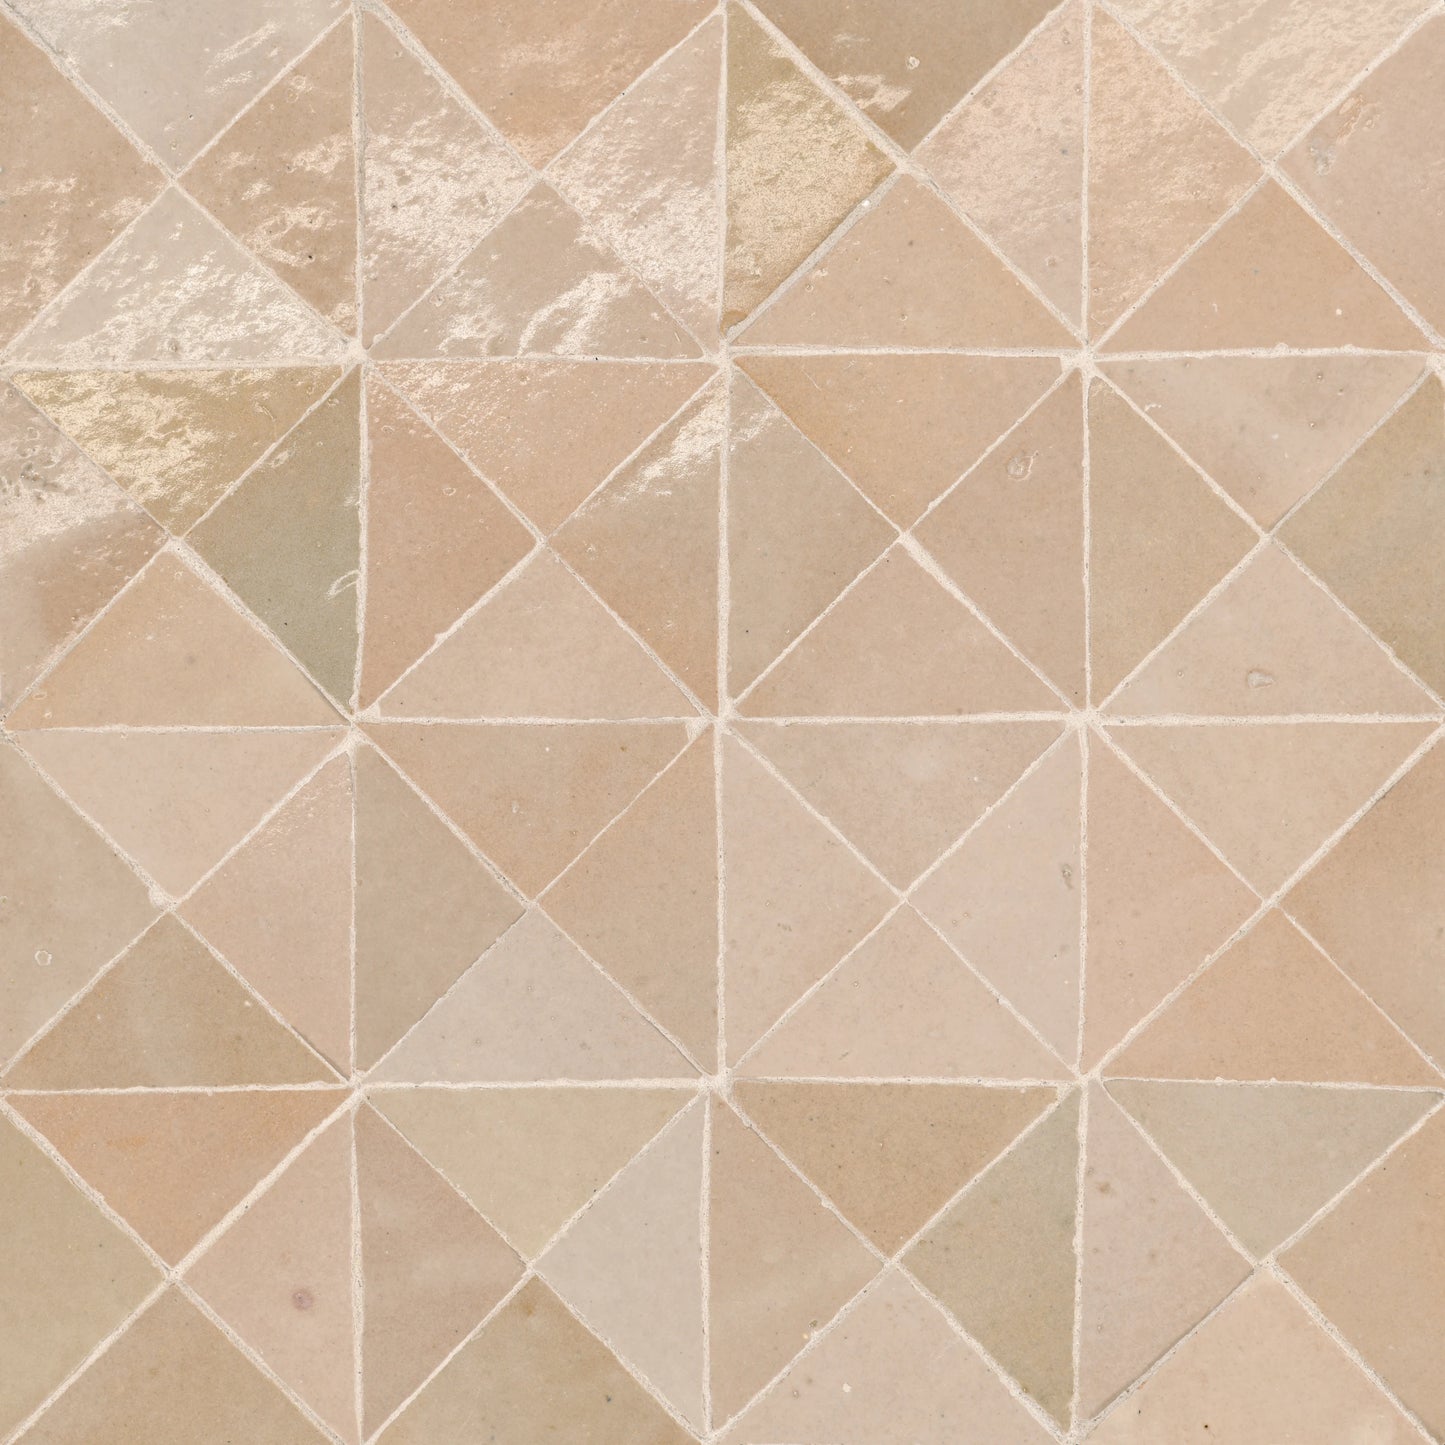 Tunis Triangle Zellige Tile Glossy in Ivory